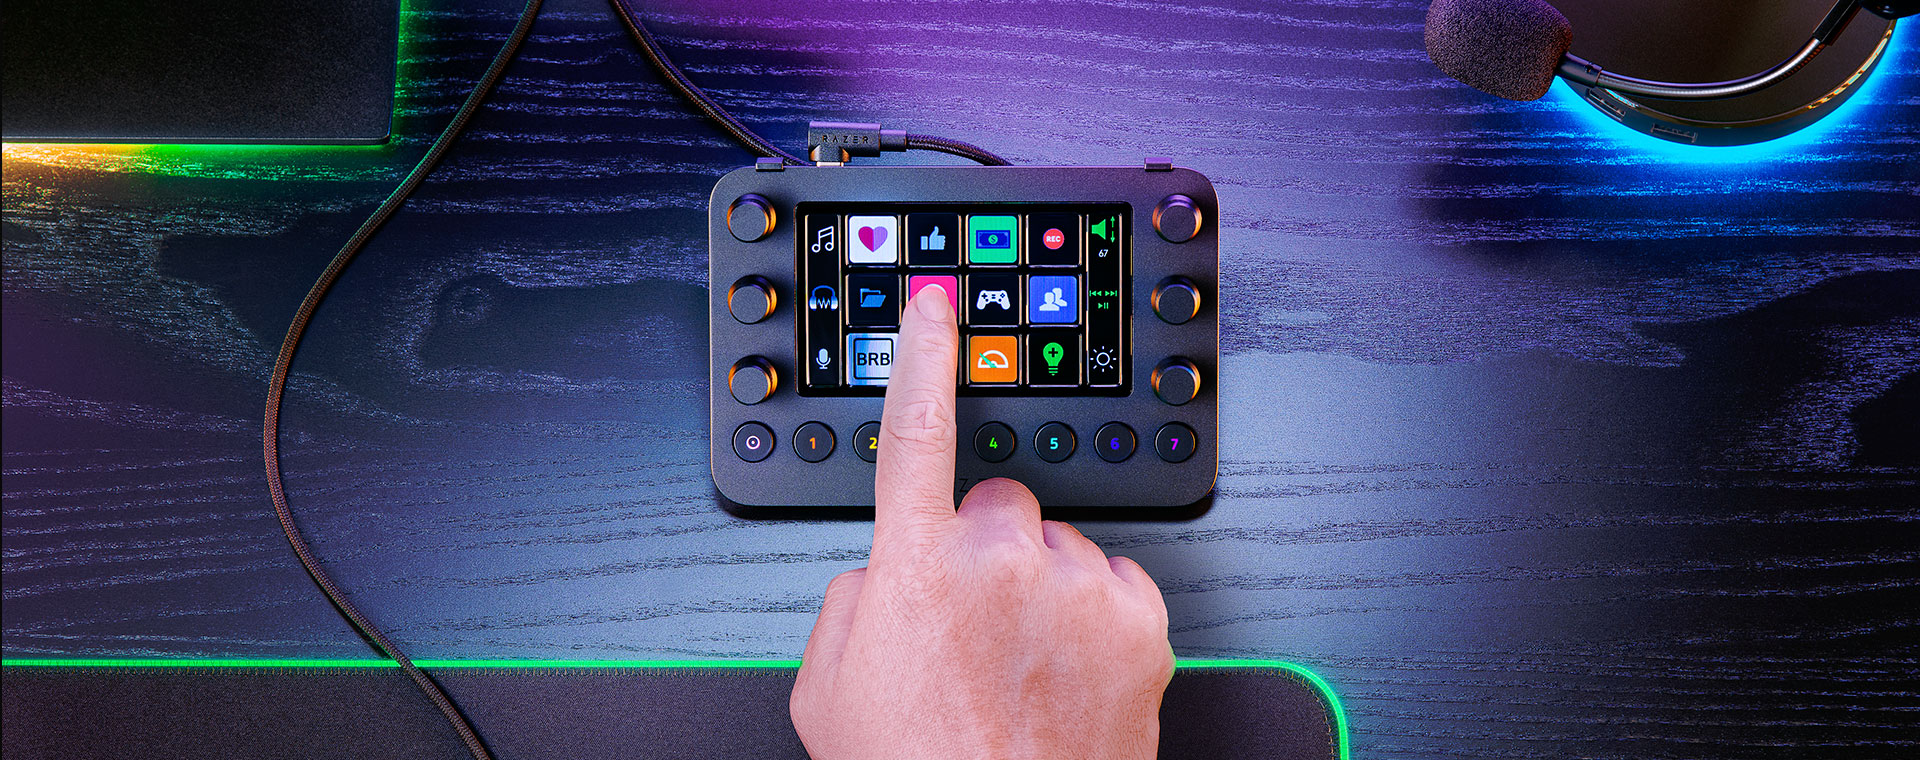 Is The Razer Stream Controller Good for Video and Photo Editing?